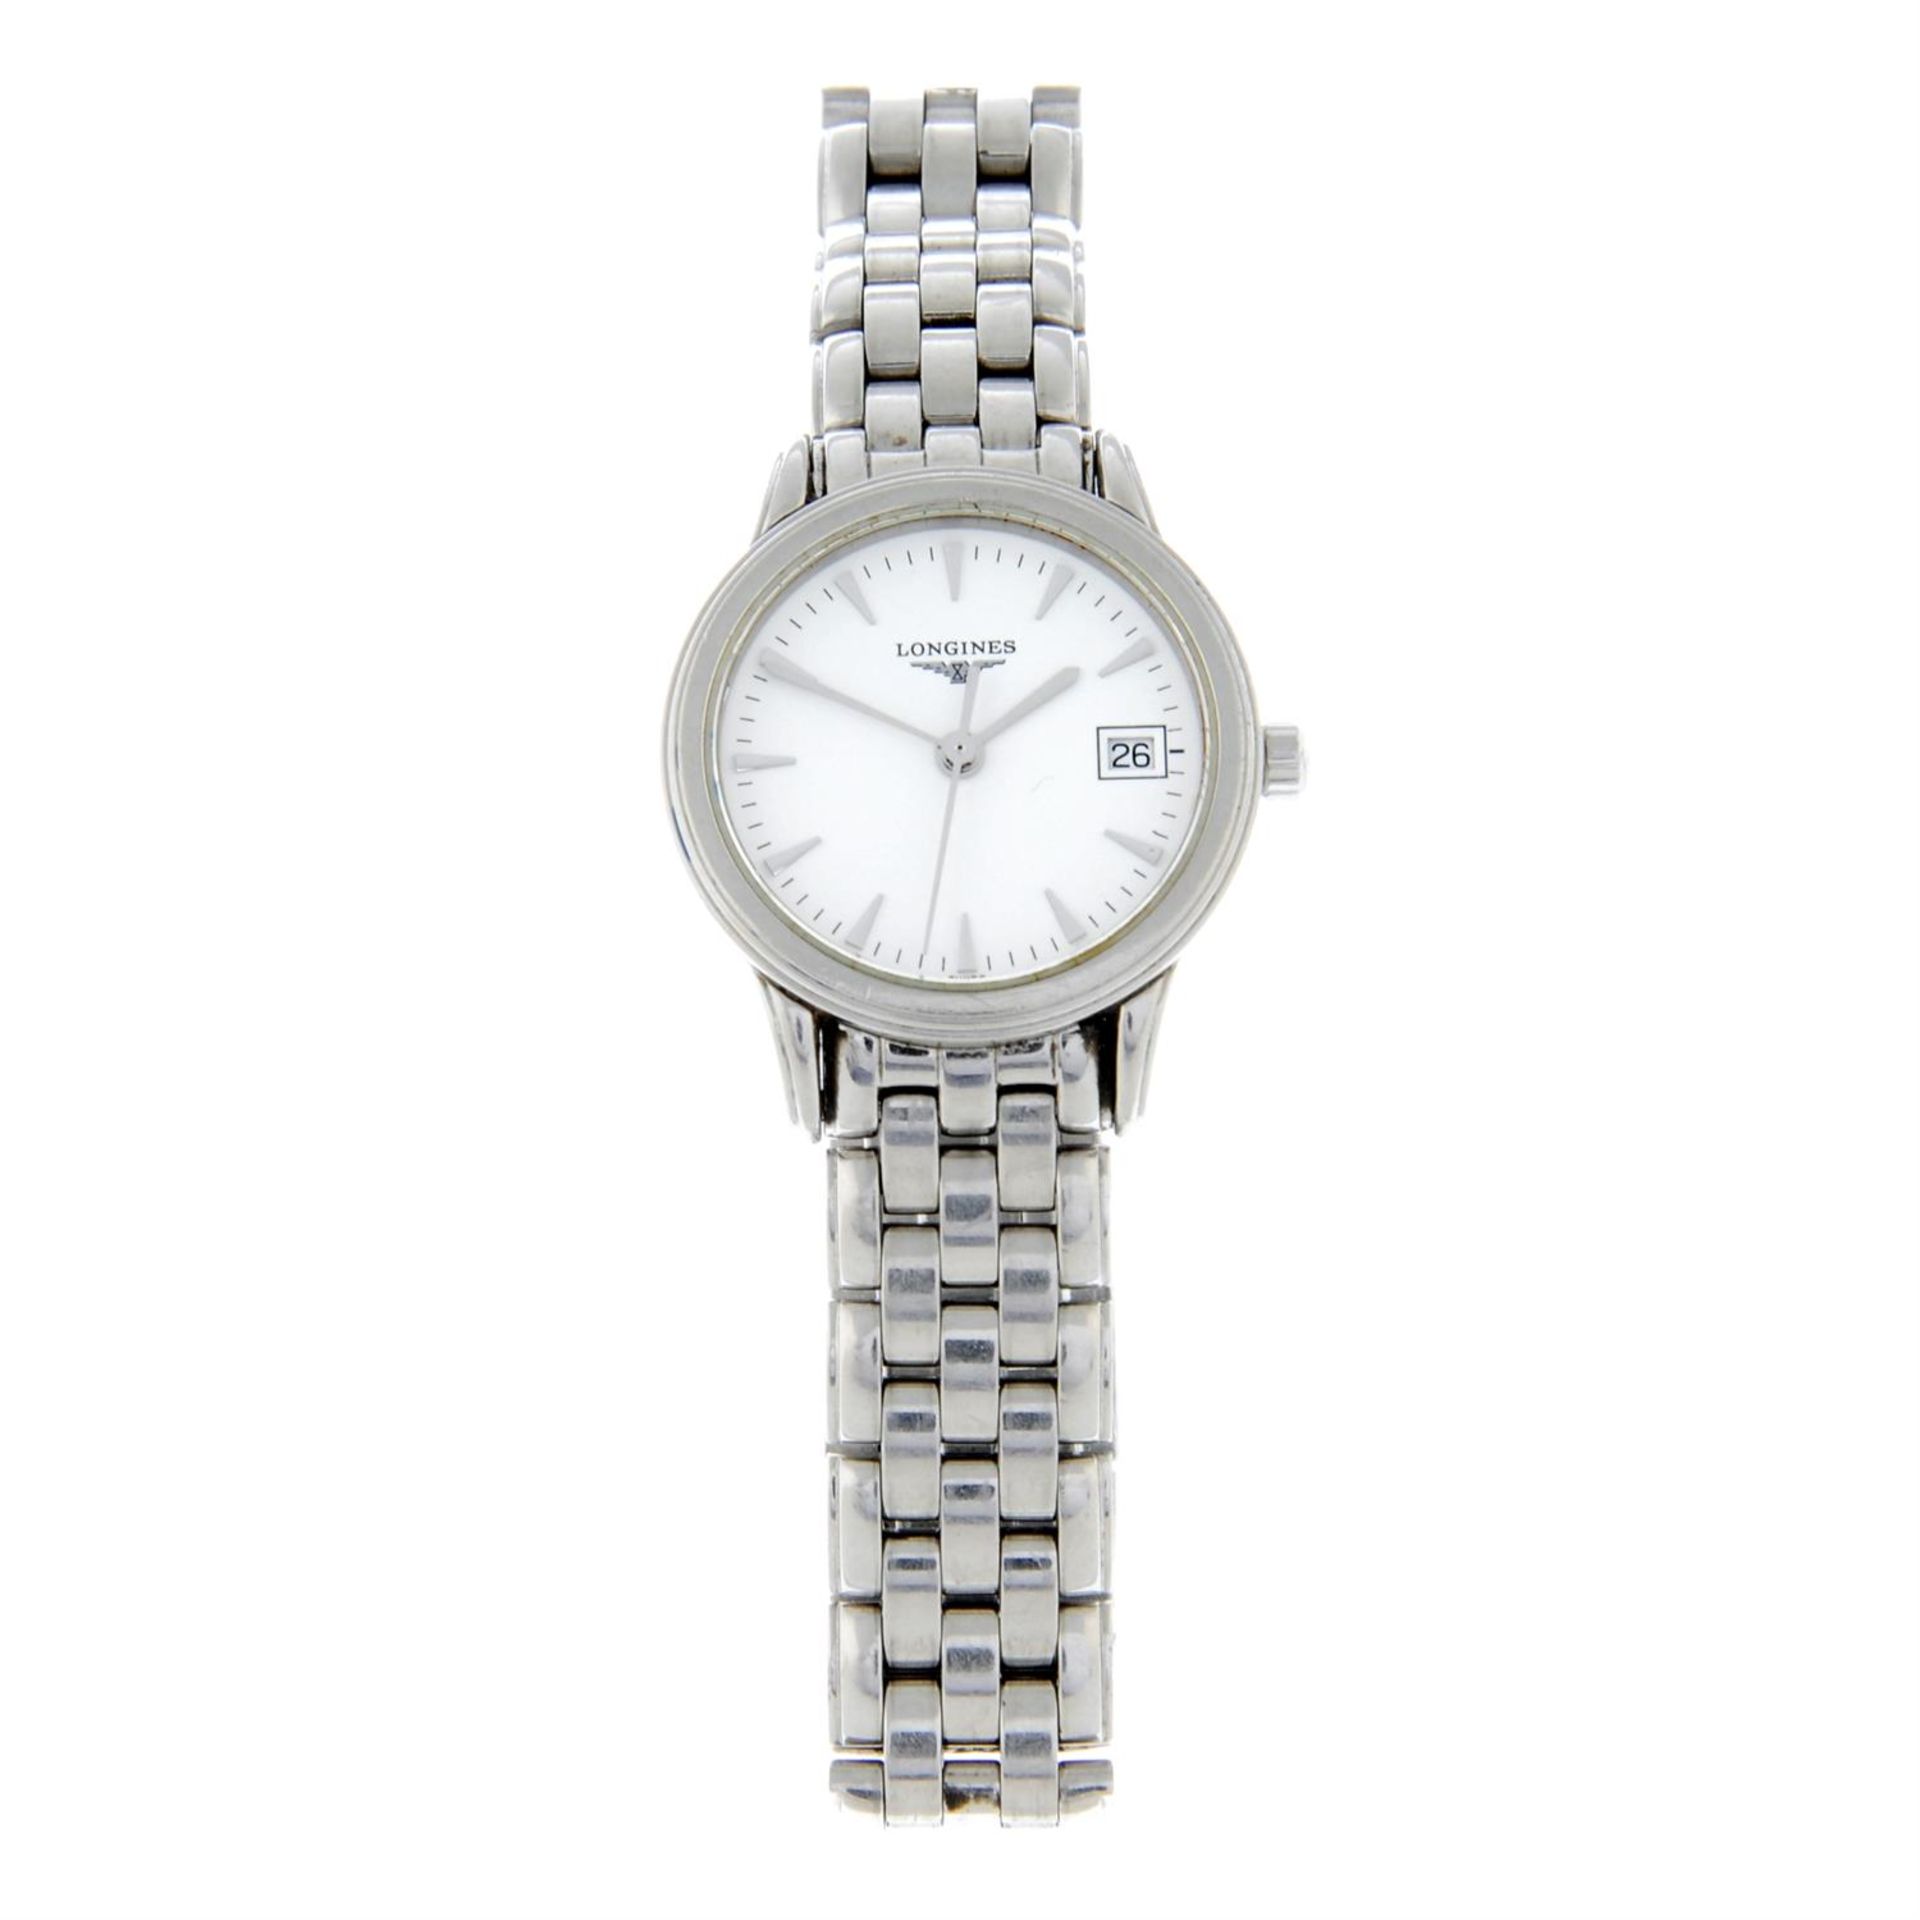 LONGINES - a stainless steel Flagship bracelet watch (25mm) with a Longines wrist watch and a